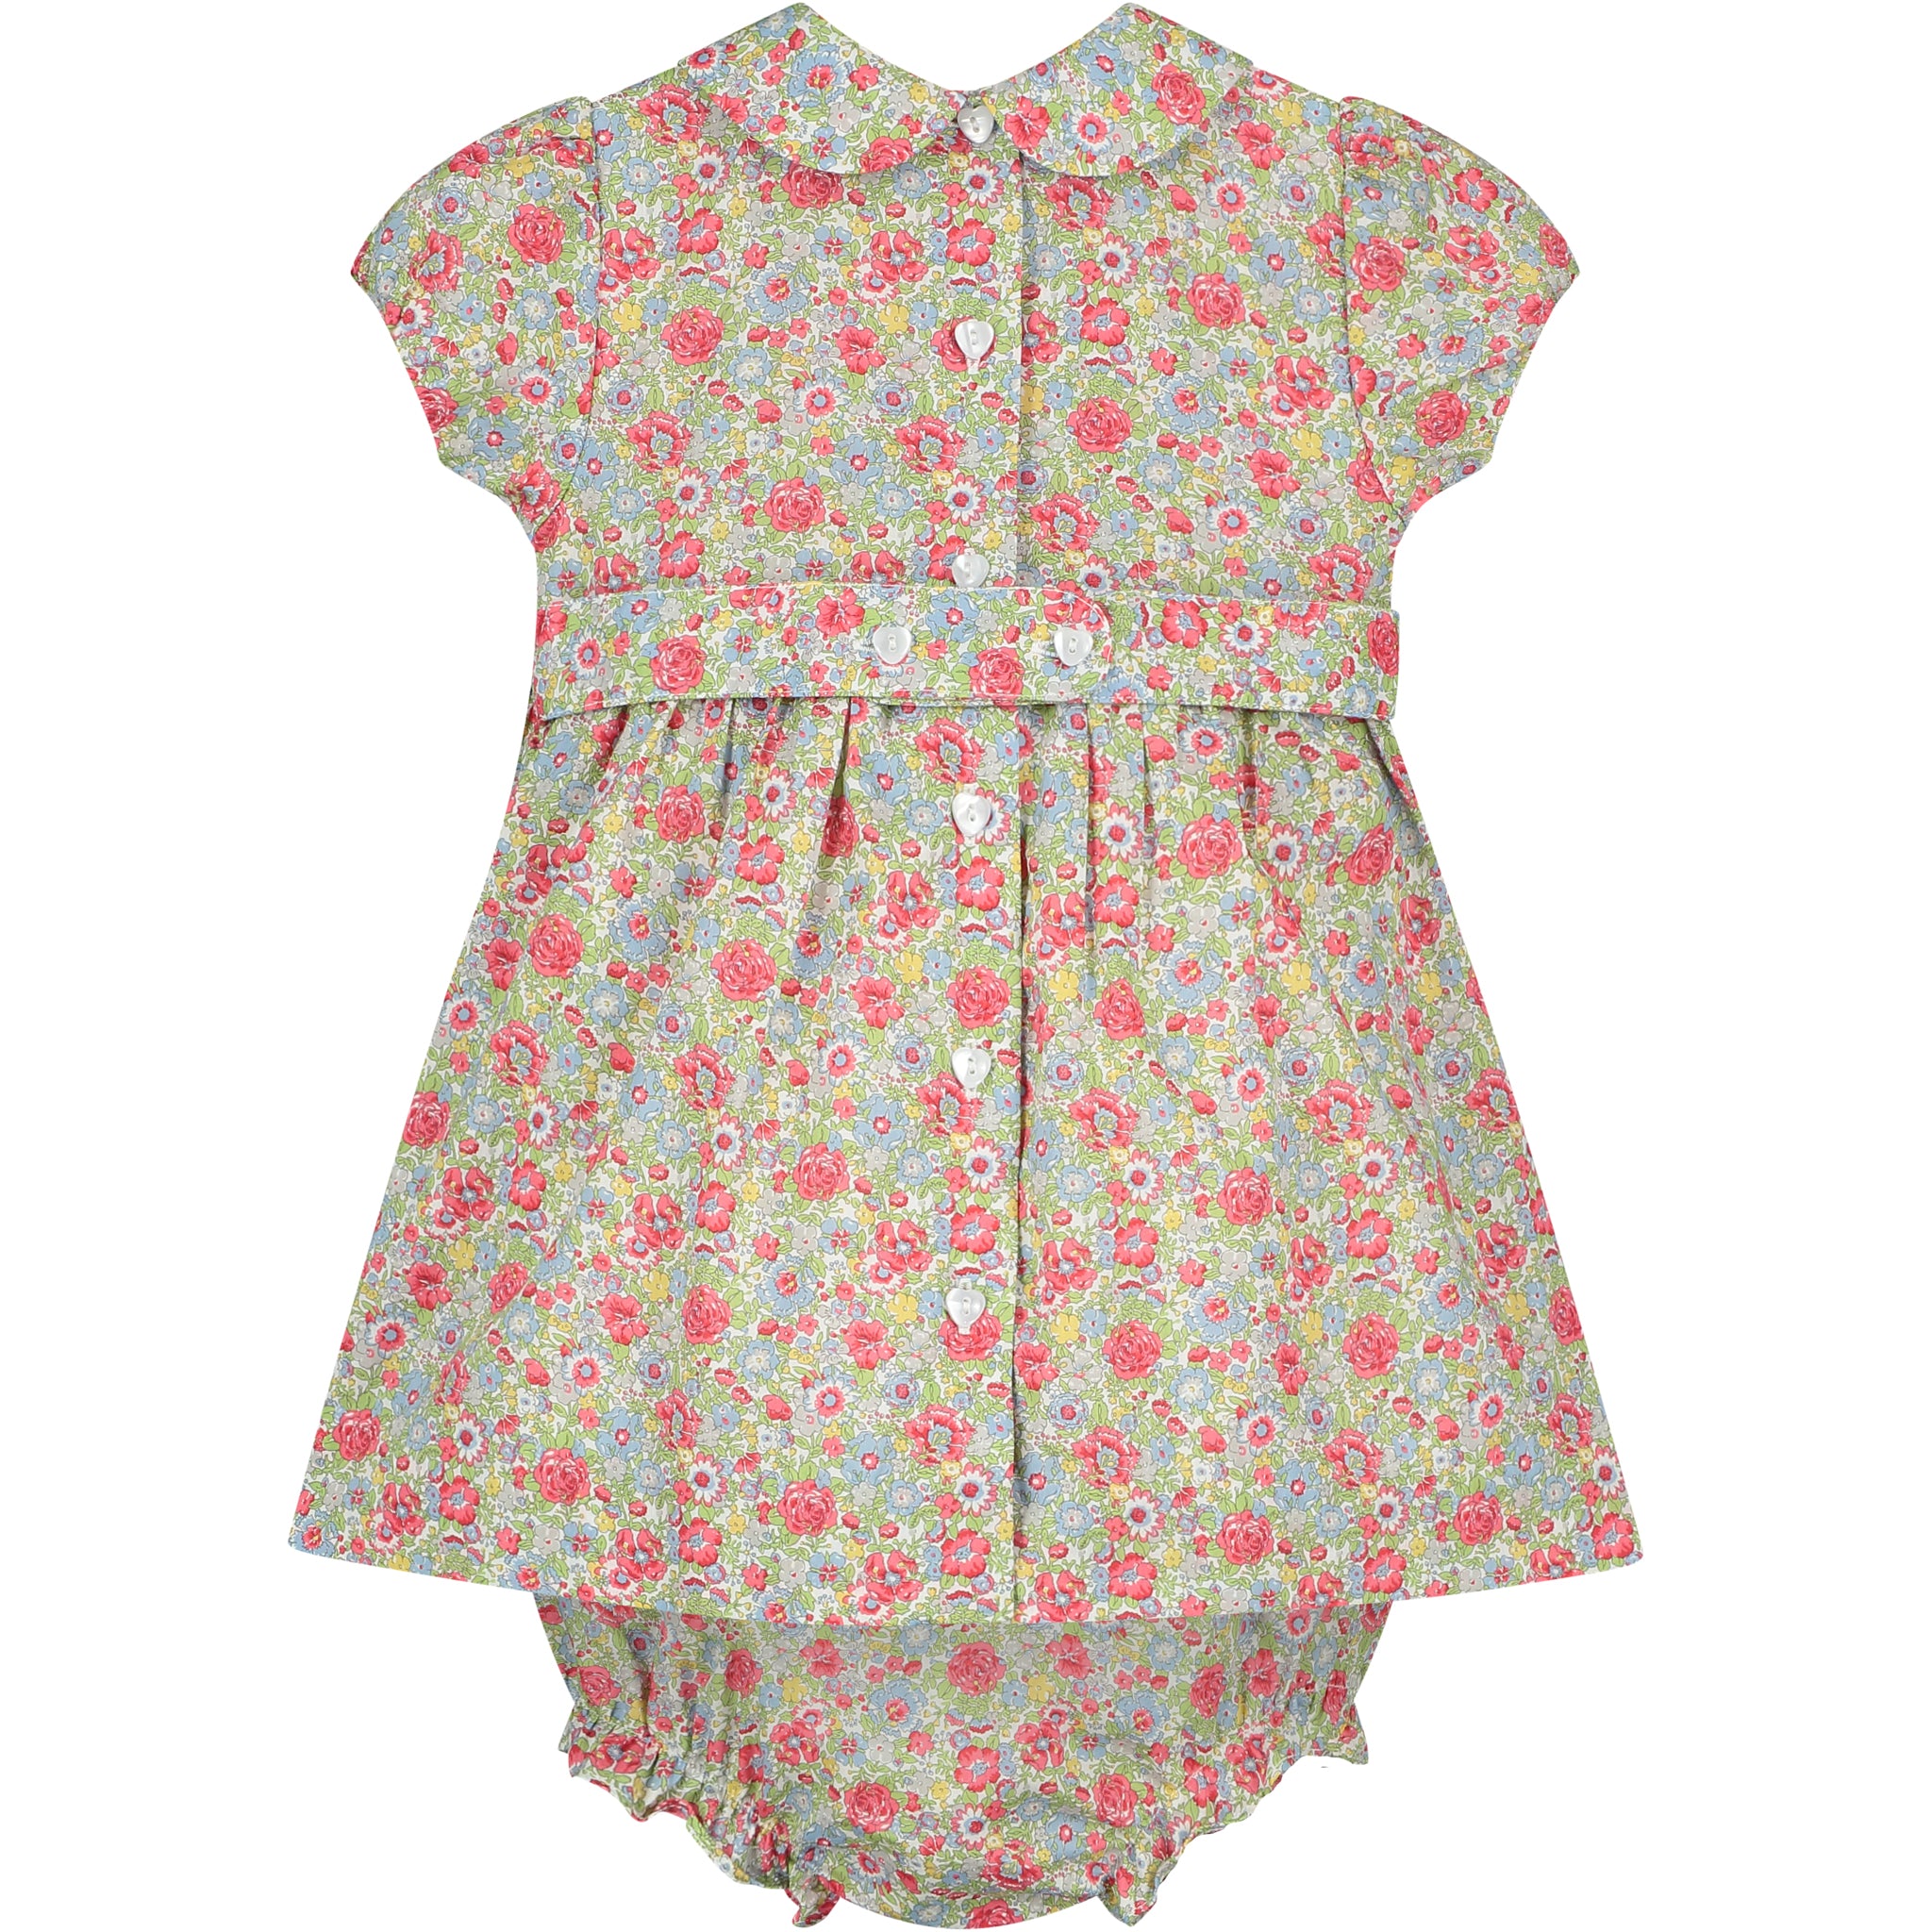 floral smock dress made from Liberty fabric, back